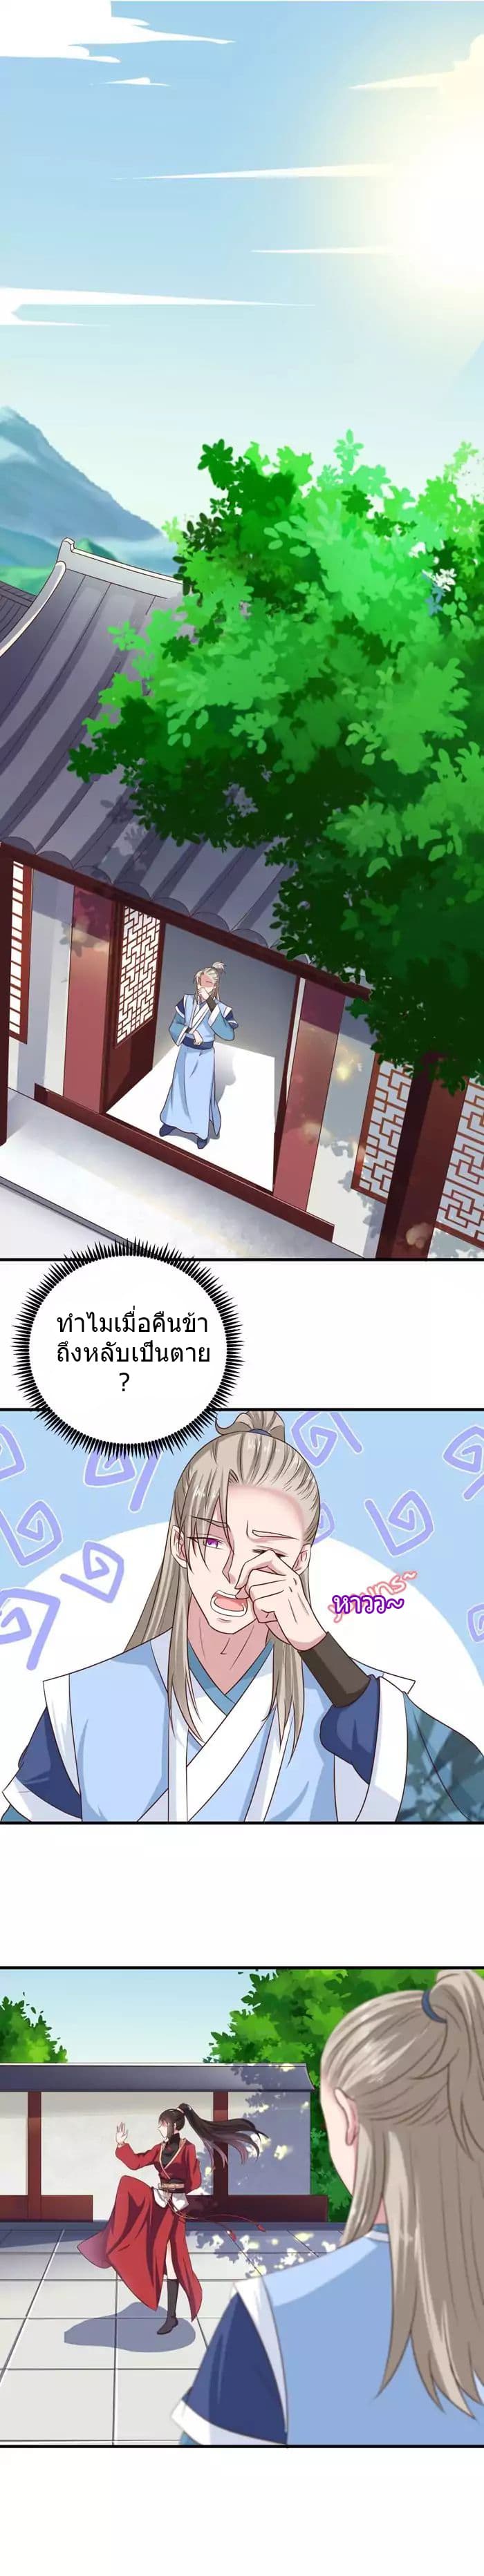 The Ghostly Doctor - หน้า 2